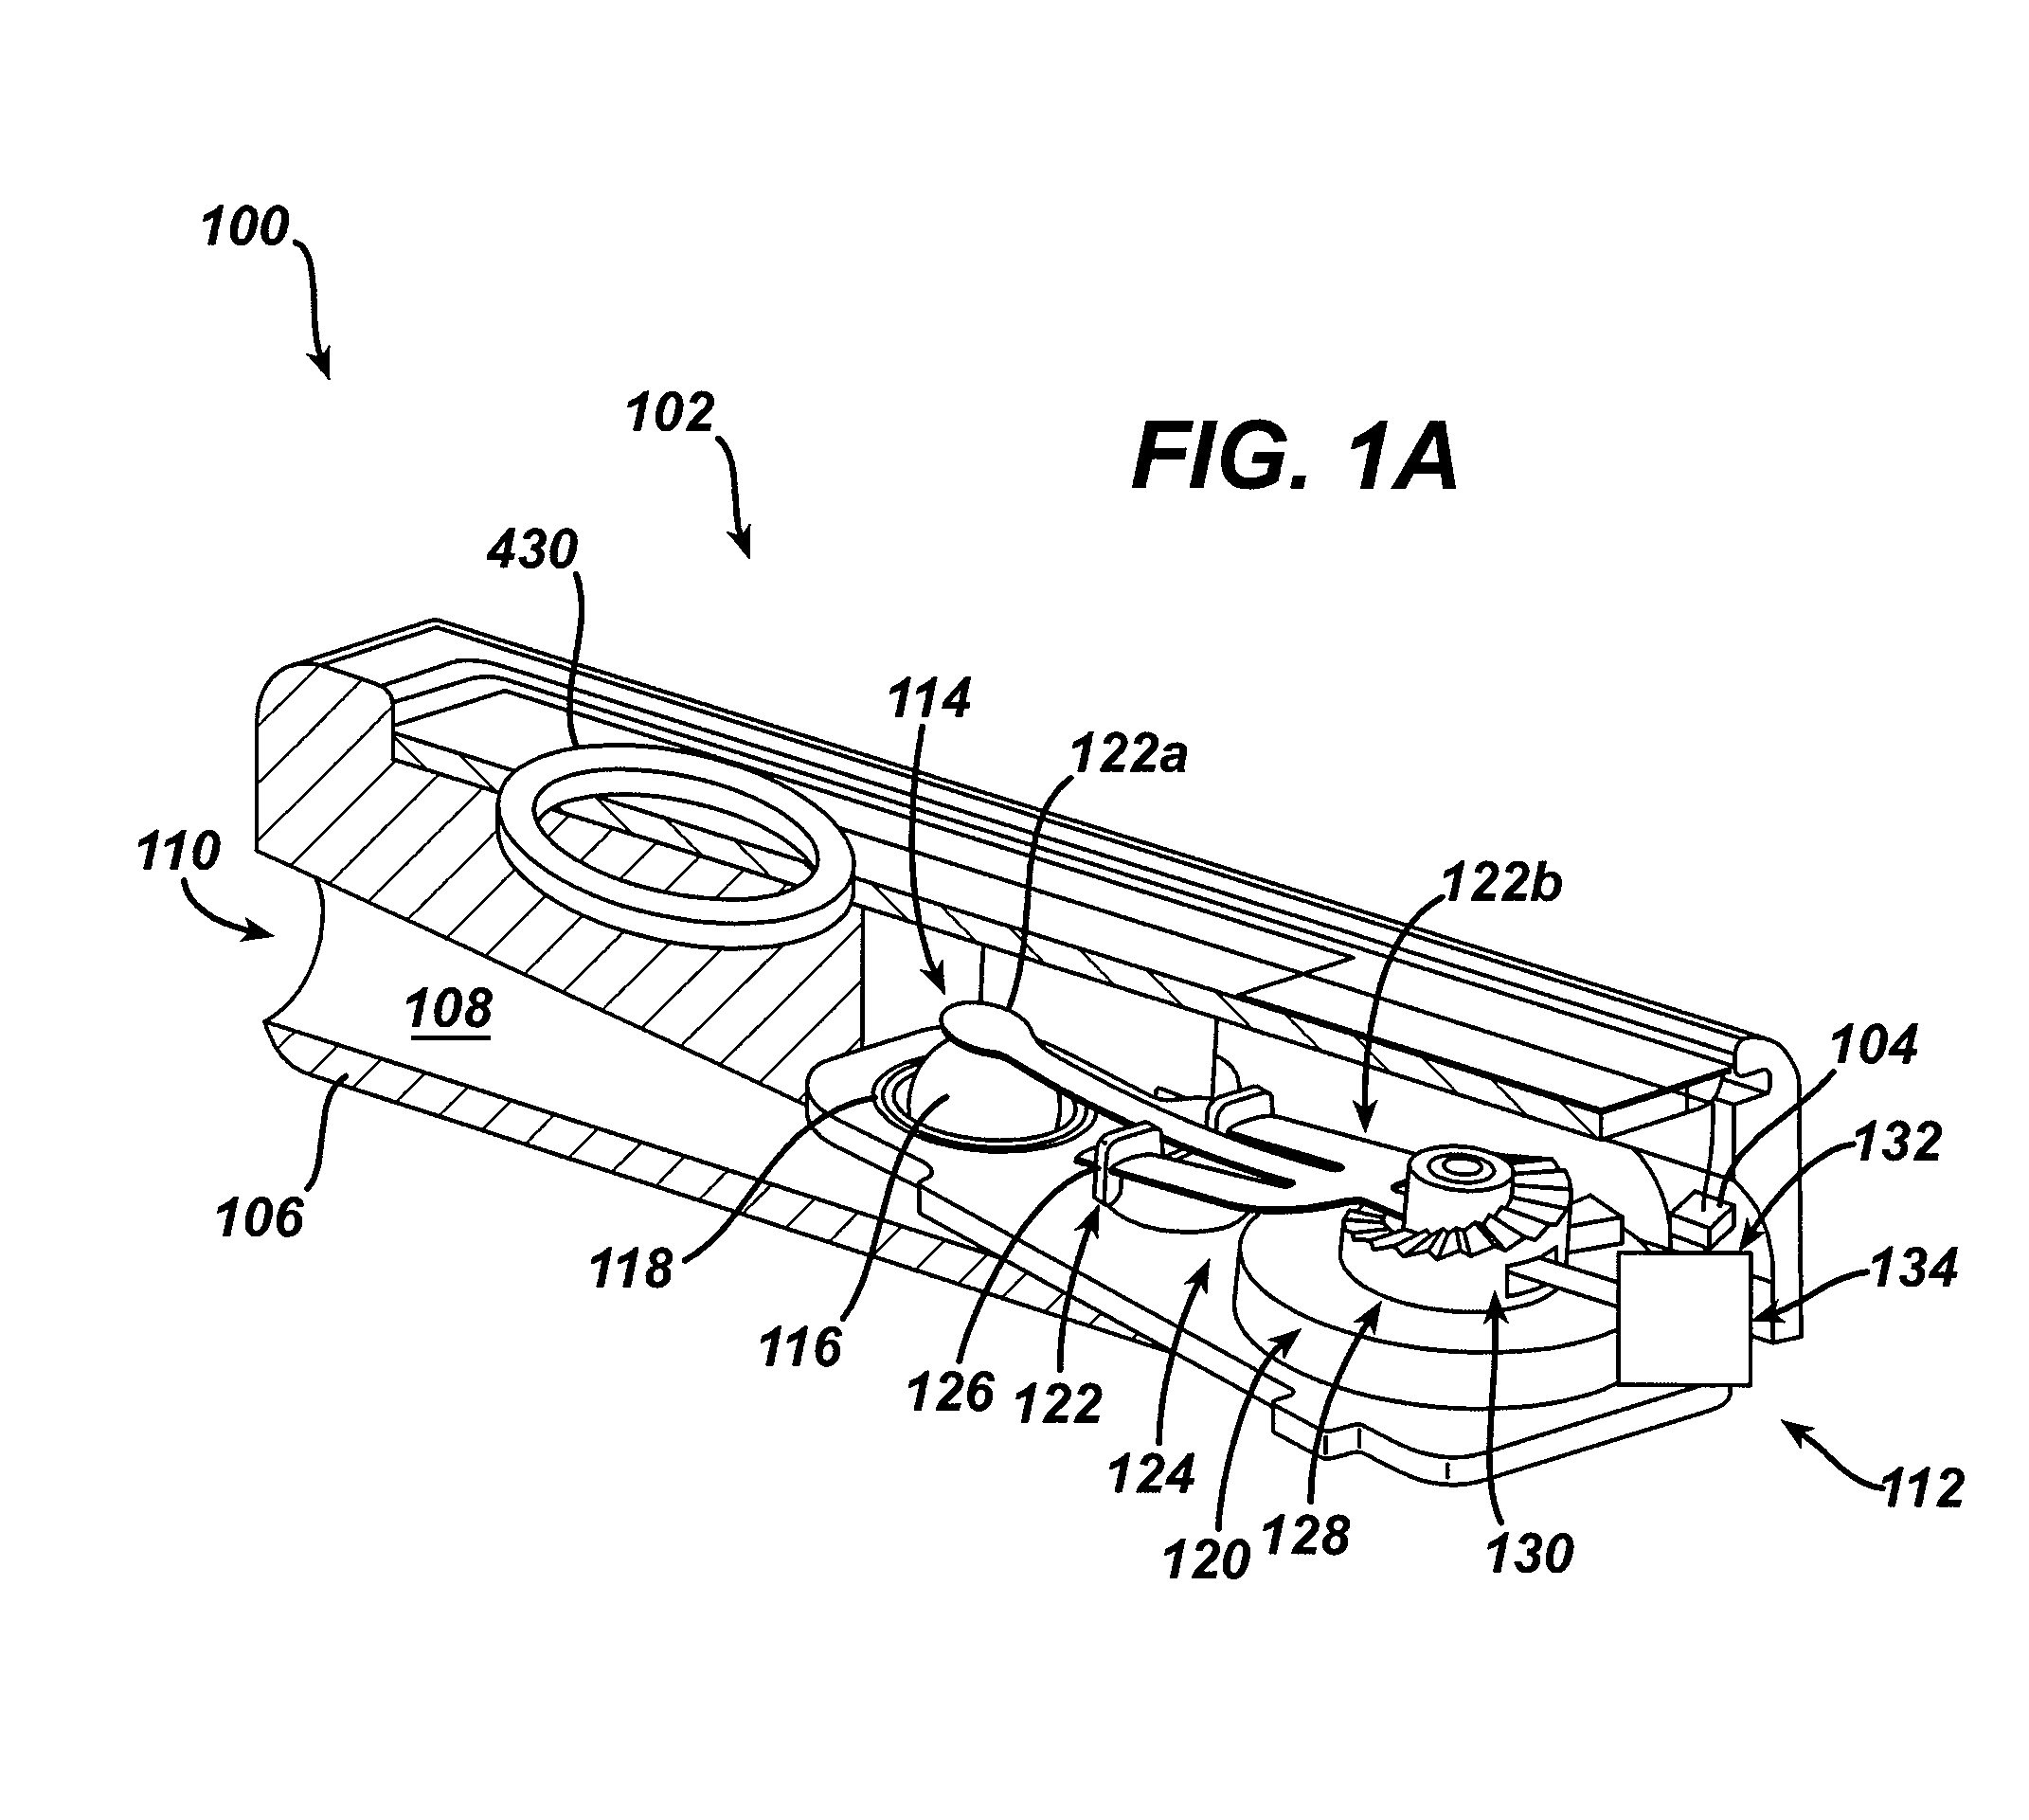 Programmable Shunt with Electromechanical Valve Actuator